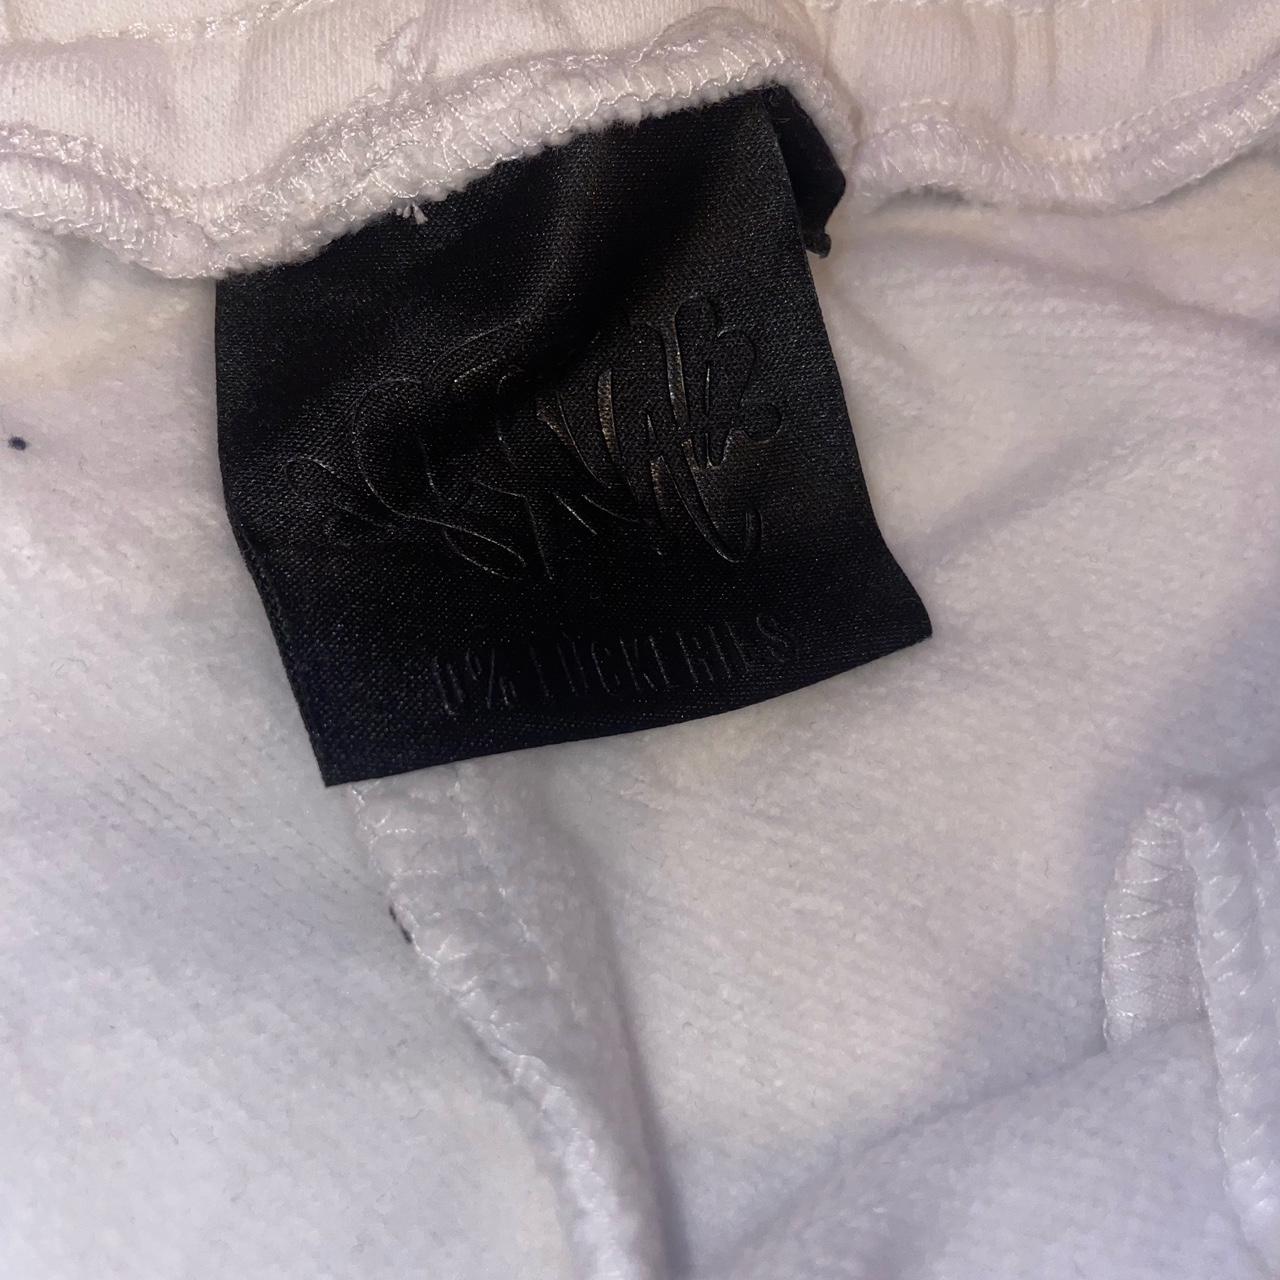 “Syna World” White Track Suit Brand New Top &... - Depop